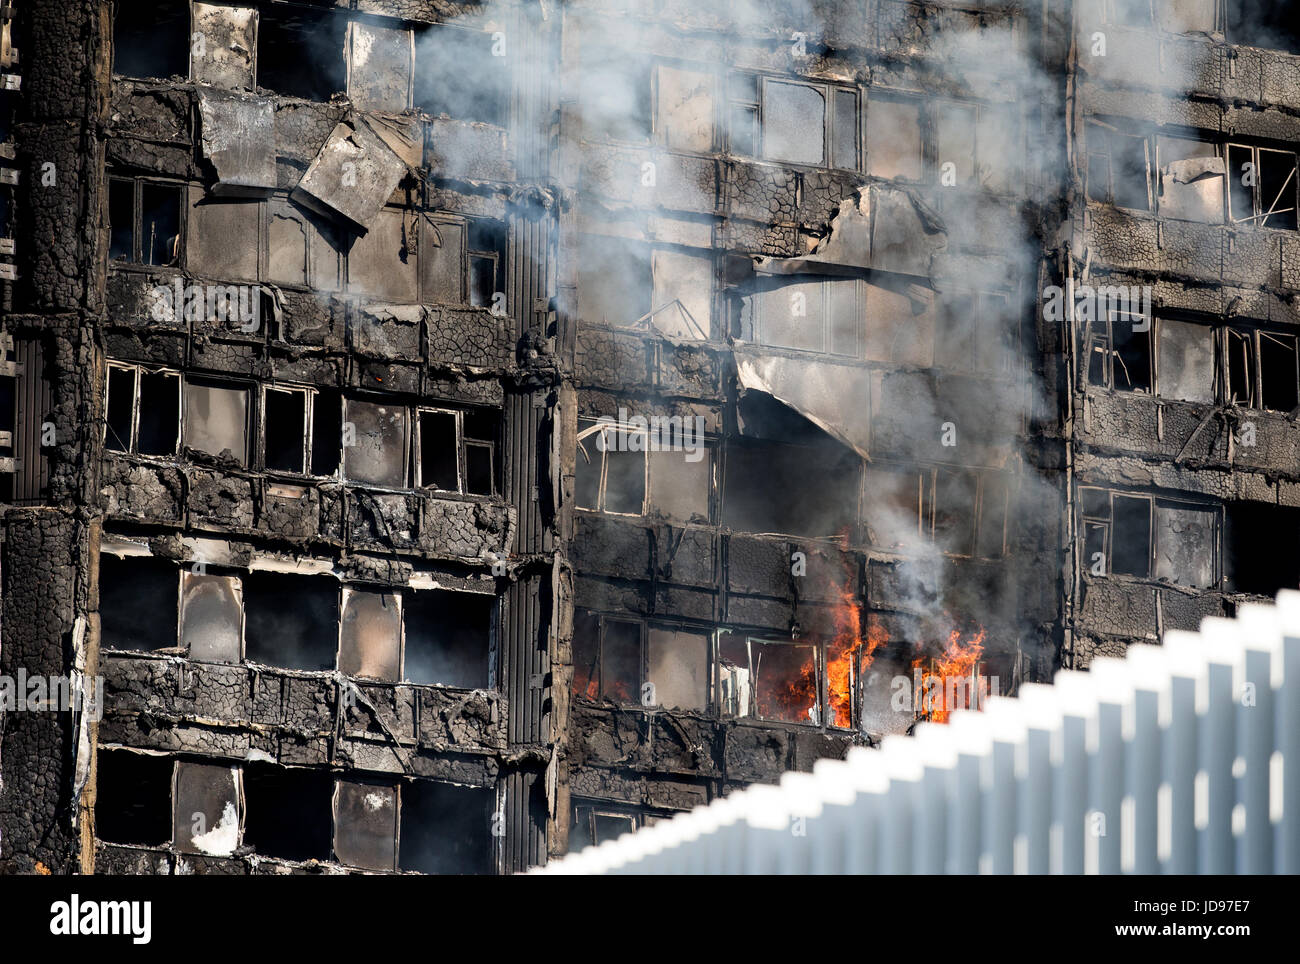 Fire burns at Grenfell Tower in Latimer road, London.The fire stared on the 4th floor when a fridge caught fire. There have been multiple casualties Stock Photo